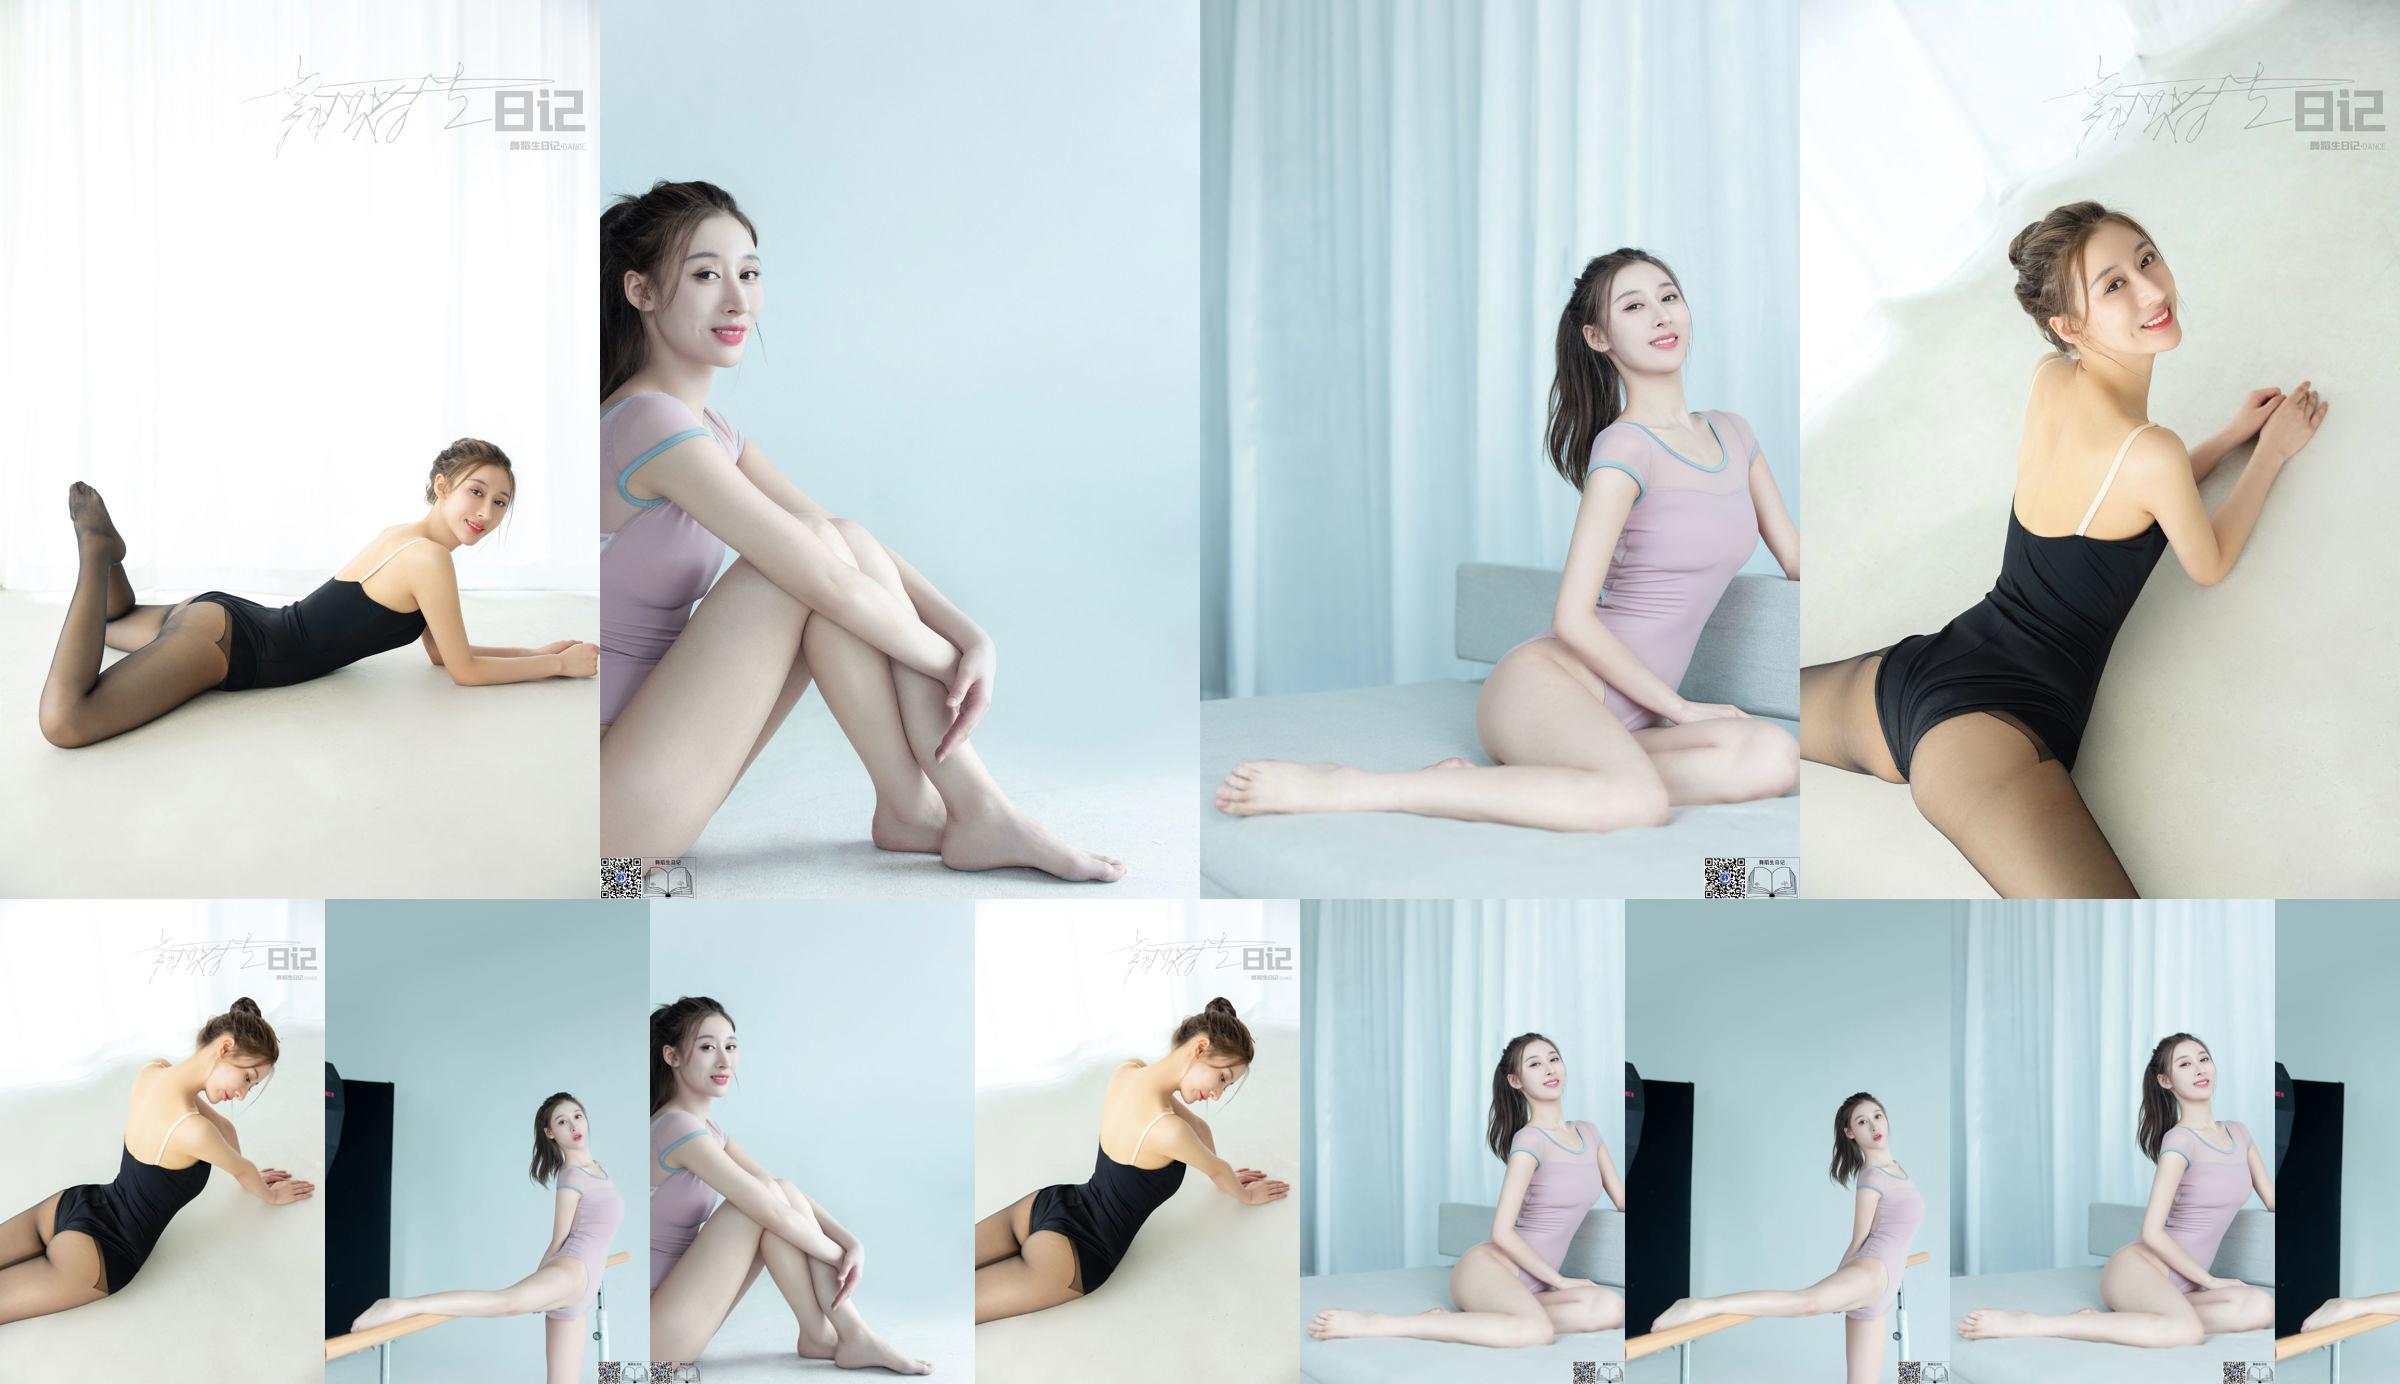 [Carrie GALLI] Diary of a Dance Student 080 Xiaona 3 No.b2f5be Page 2